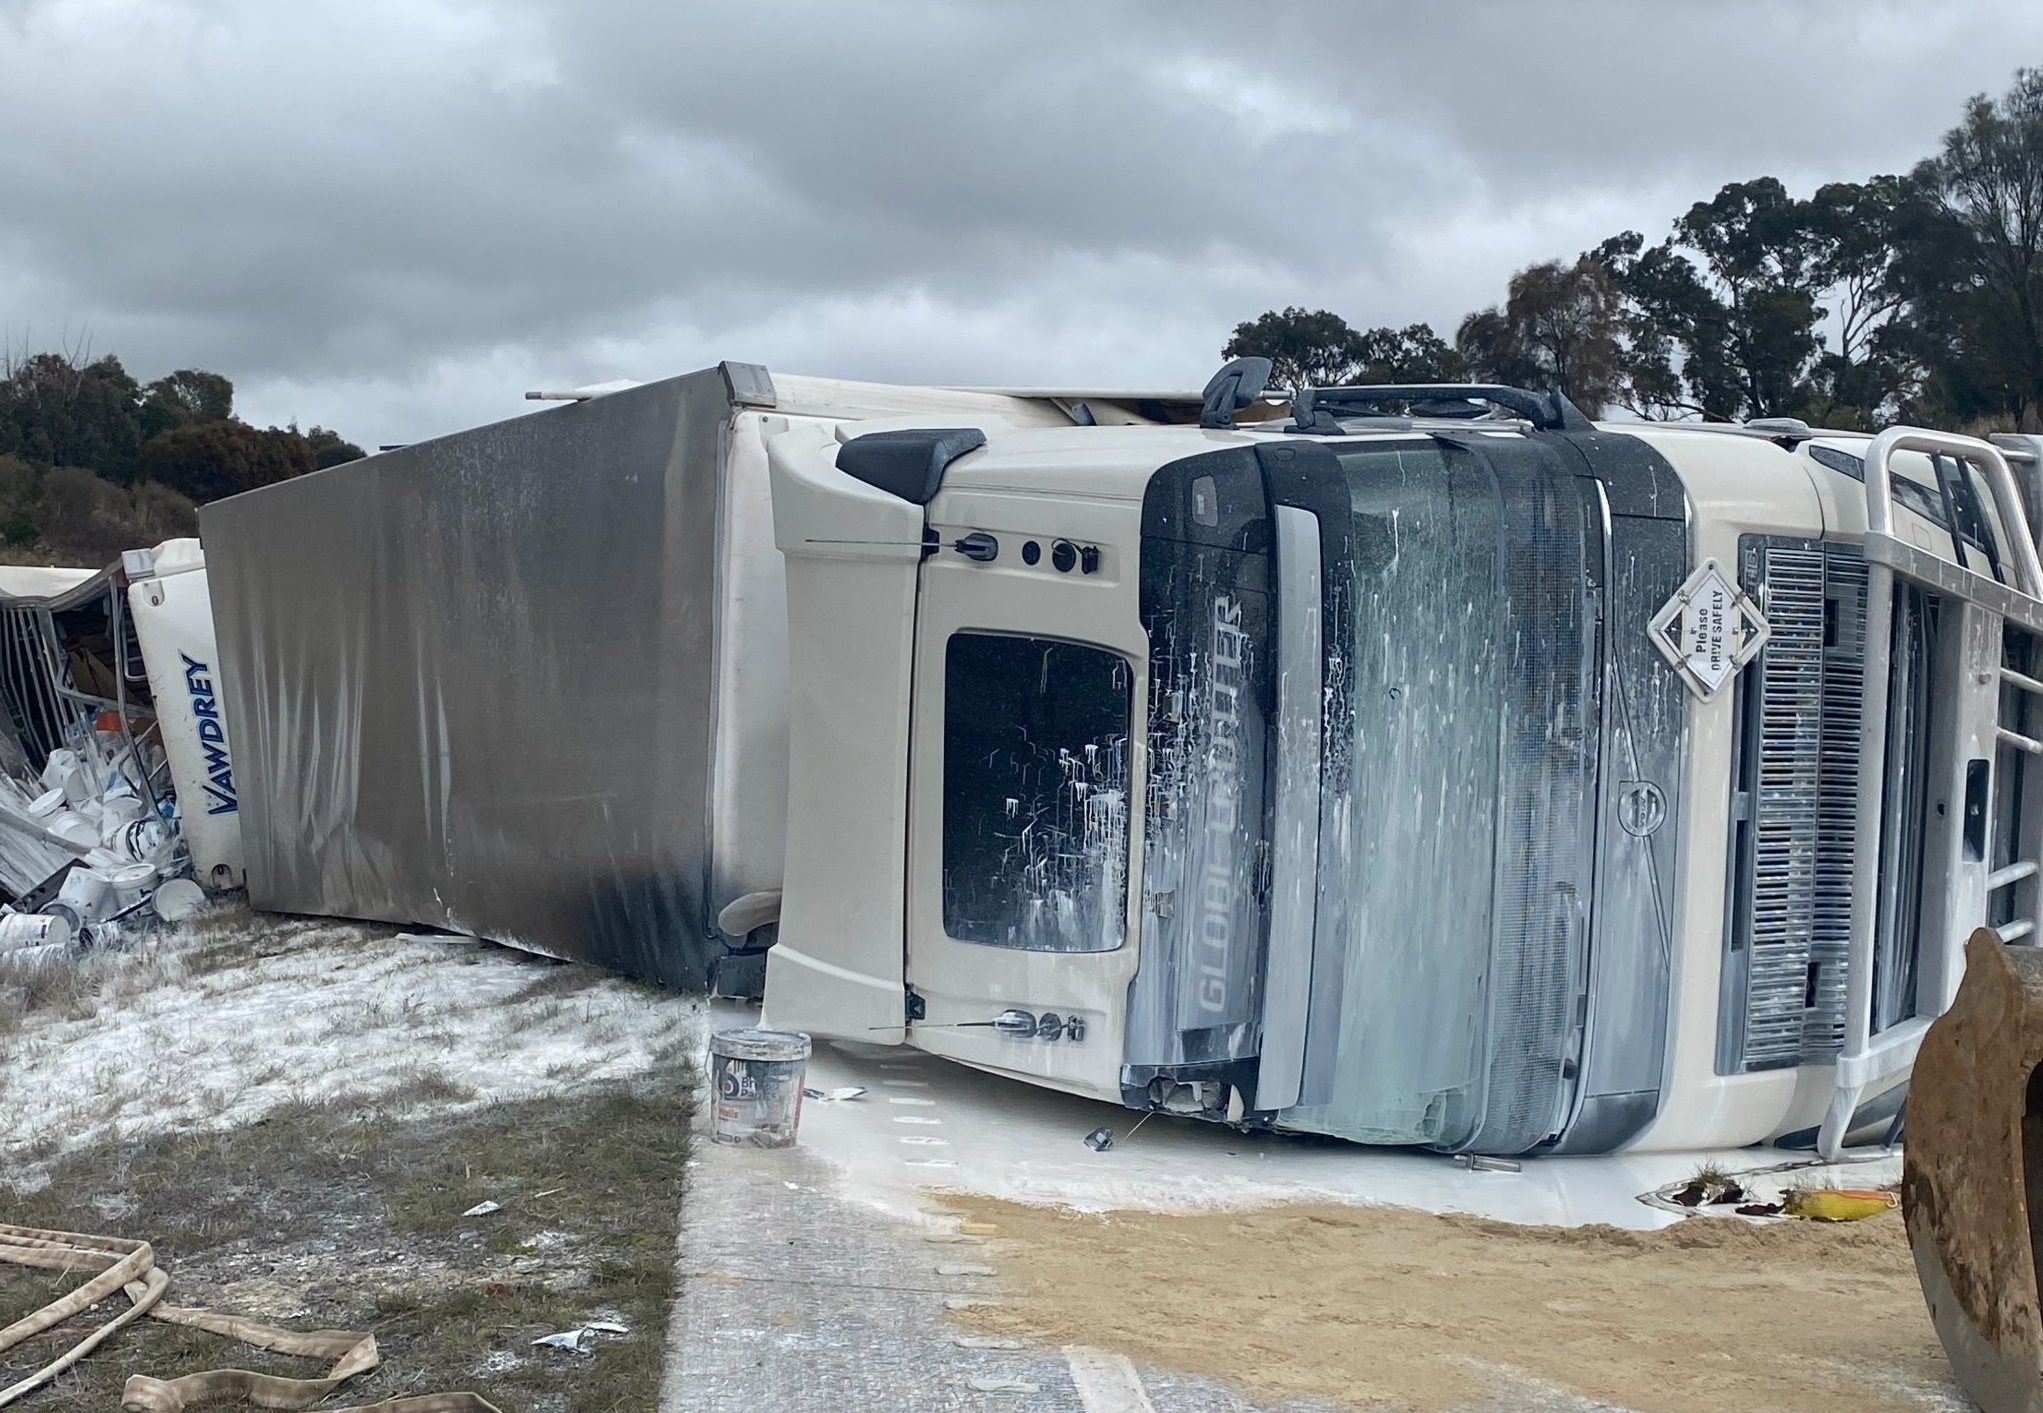 UPDATE: One Hume Highway lane re-opens as crash clean-up continues